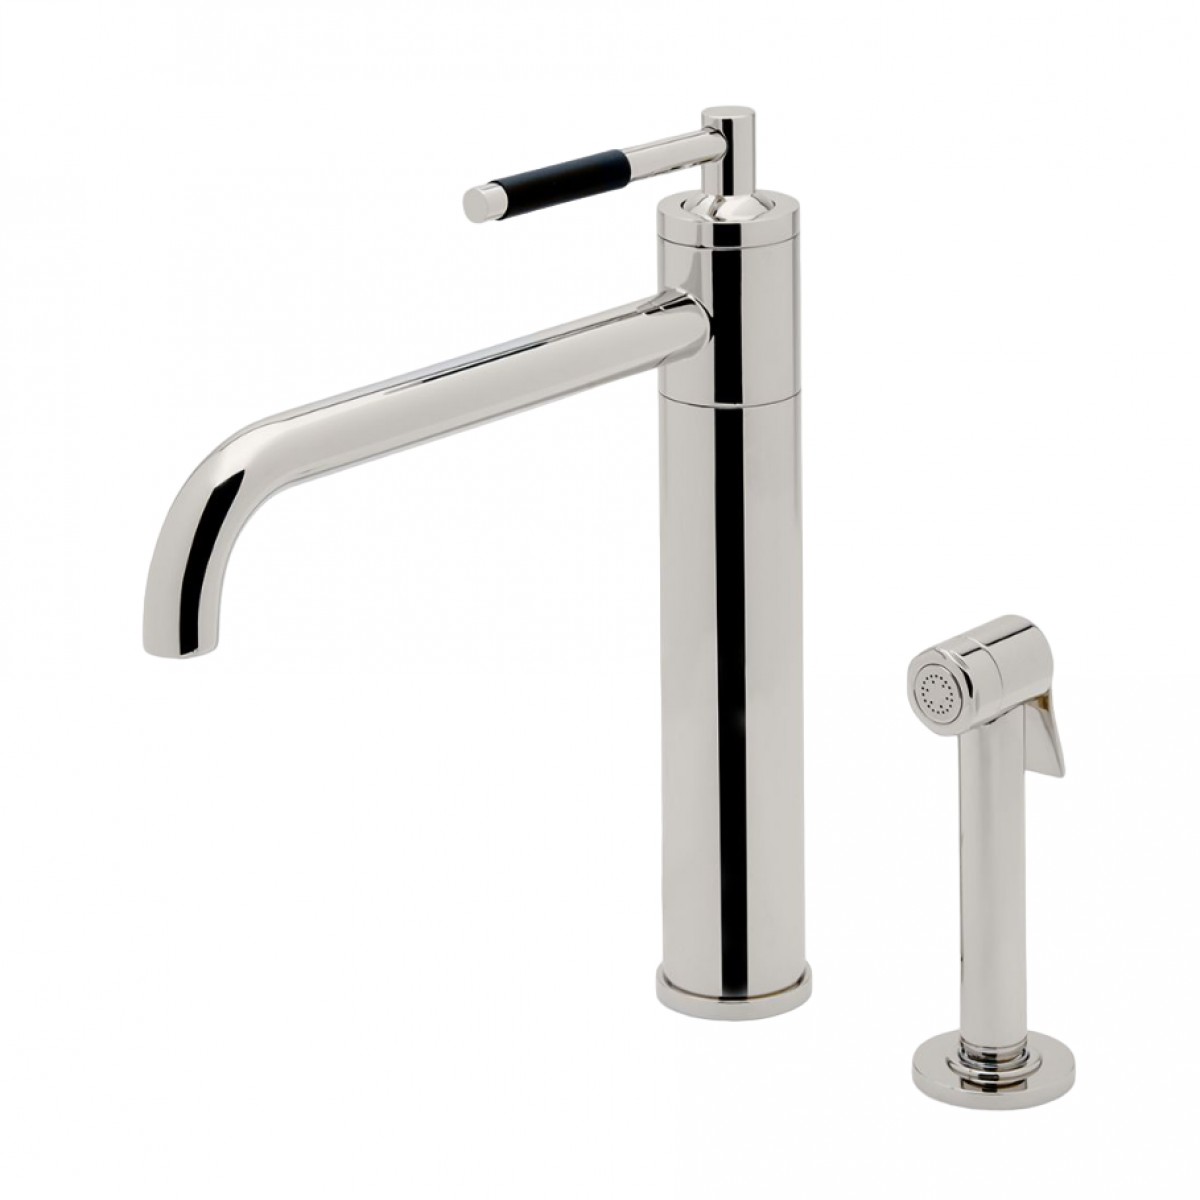 Universal Modern One Hole High Profile Kitchen Faucet, Metal Lever Handle and Spray